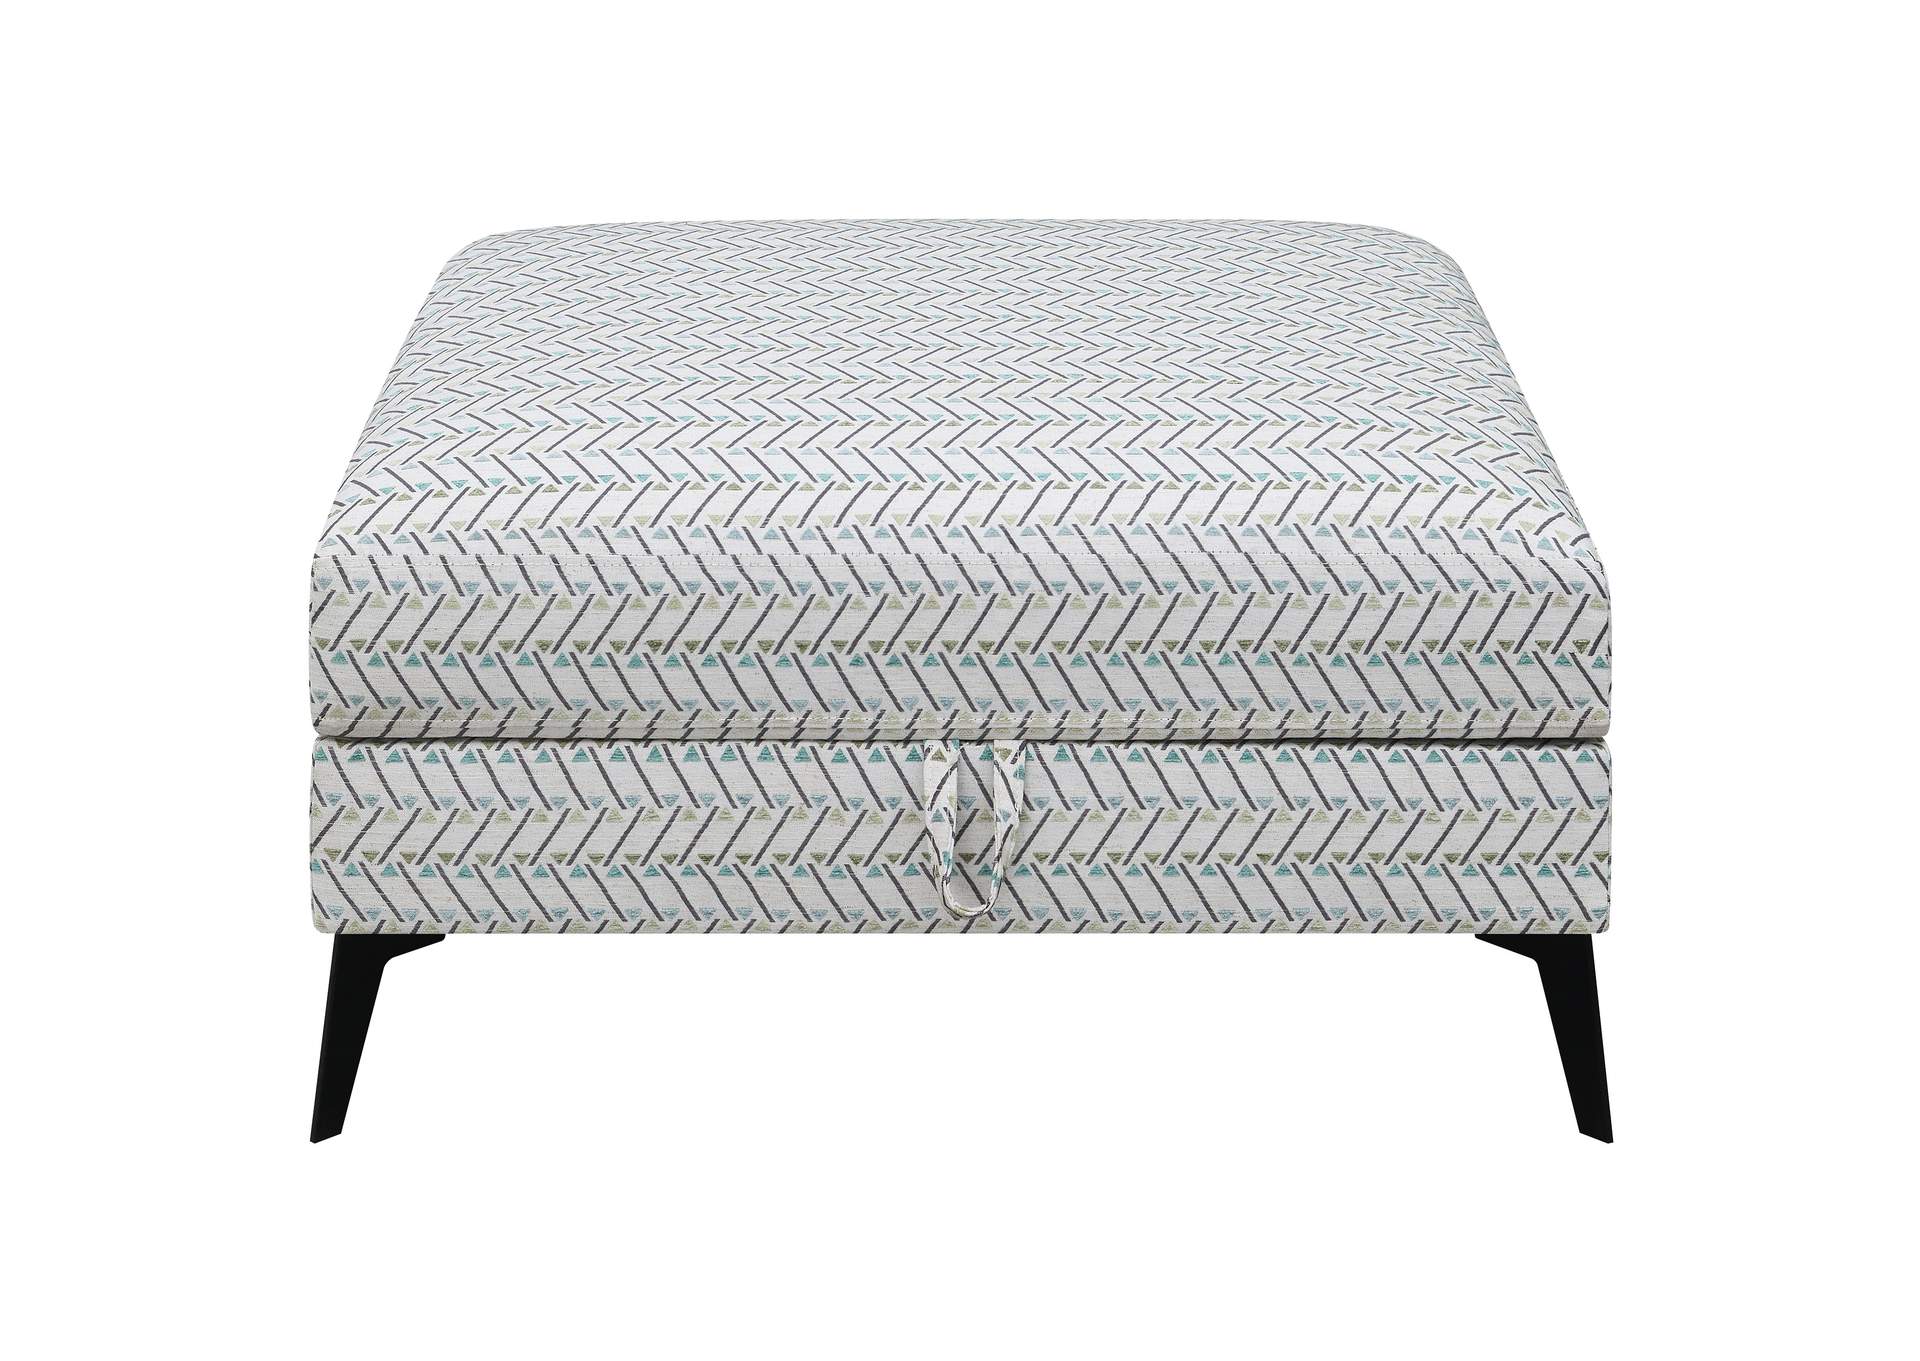 Clint Upholstered Ottoman with Tapered Legs Multi-color,Coaster Furniture